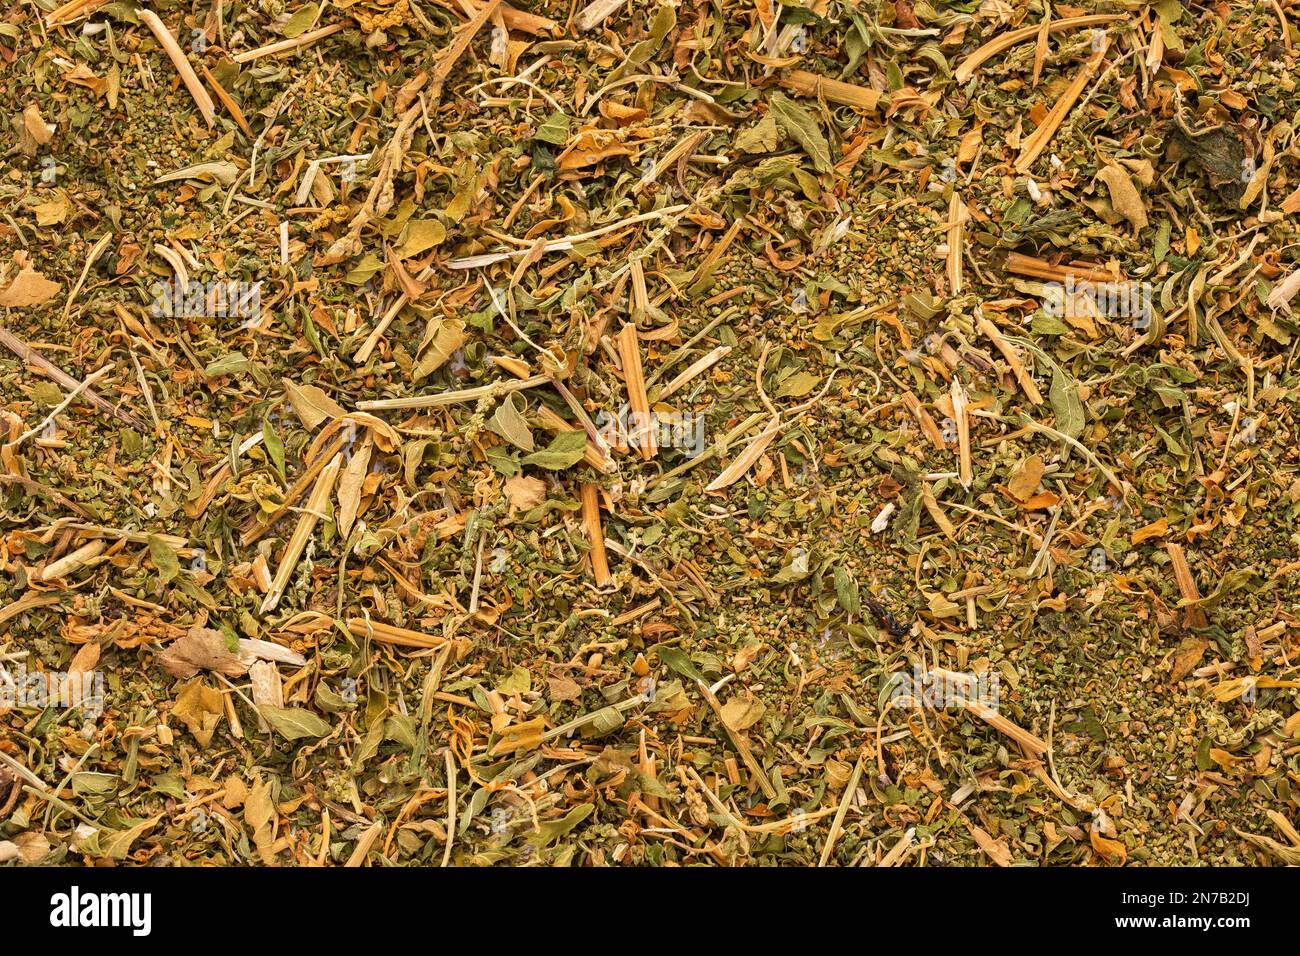 Dehydrated leaves of medicinal paico - Dysphania ambrosioides Stock Photo